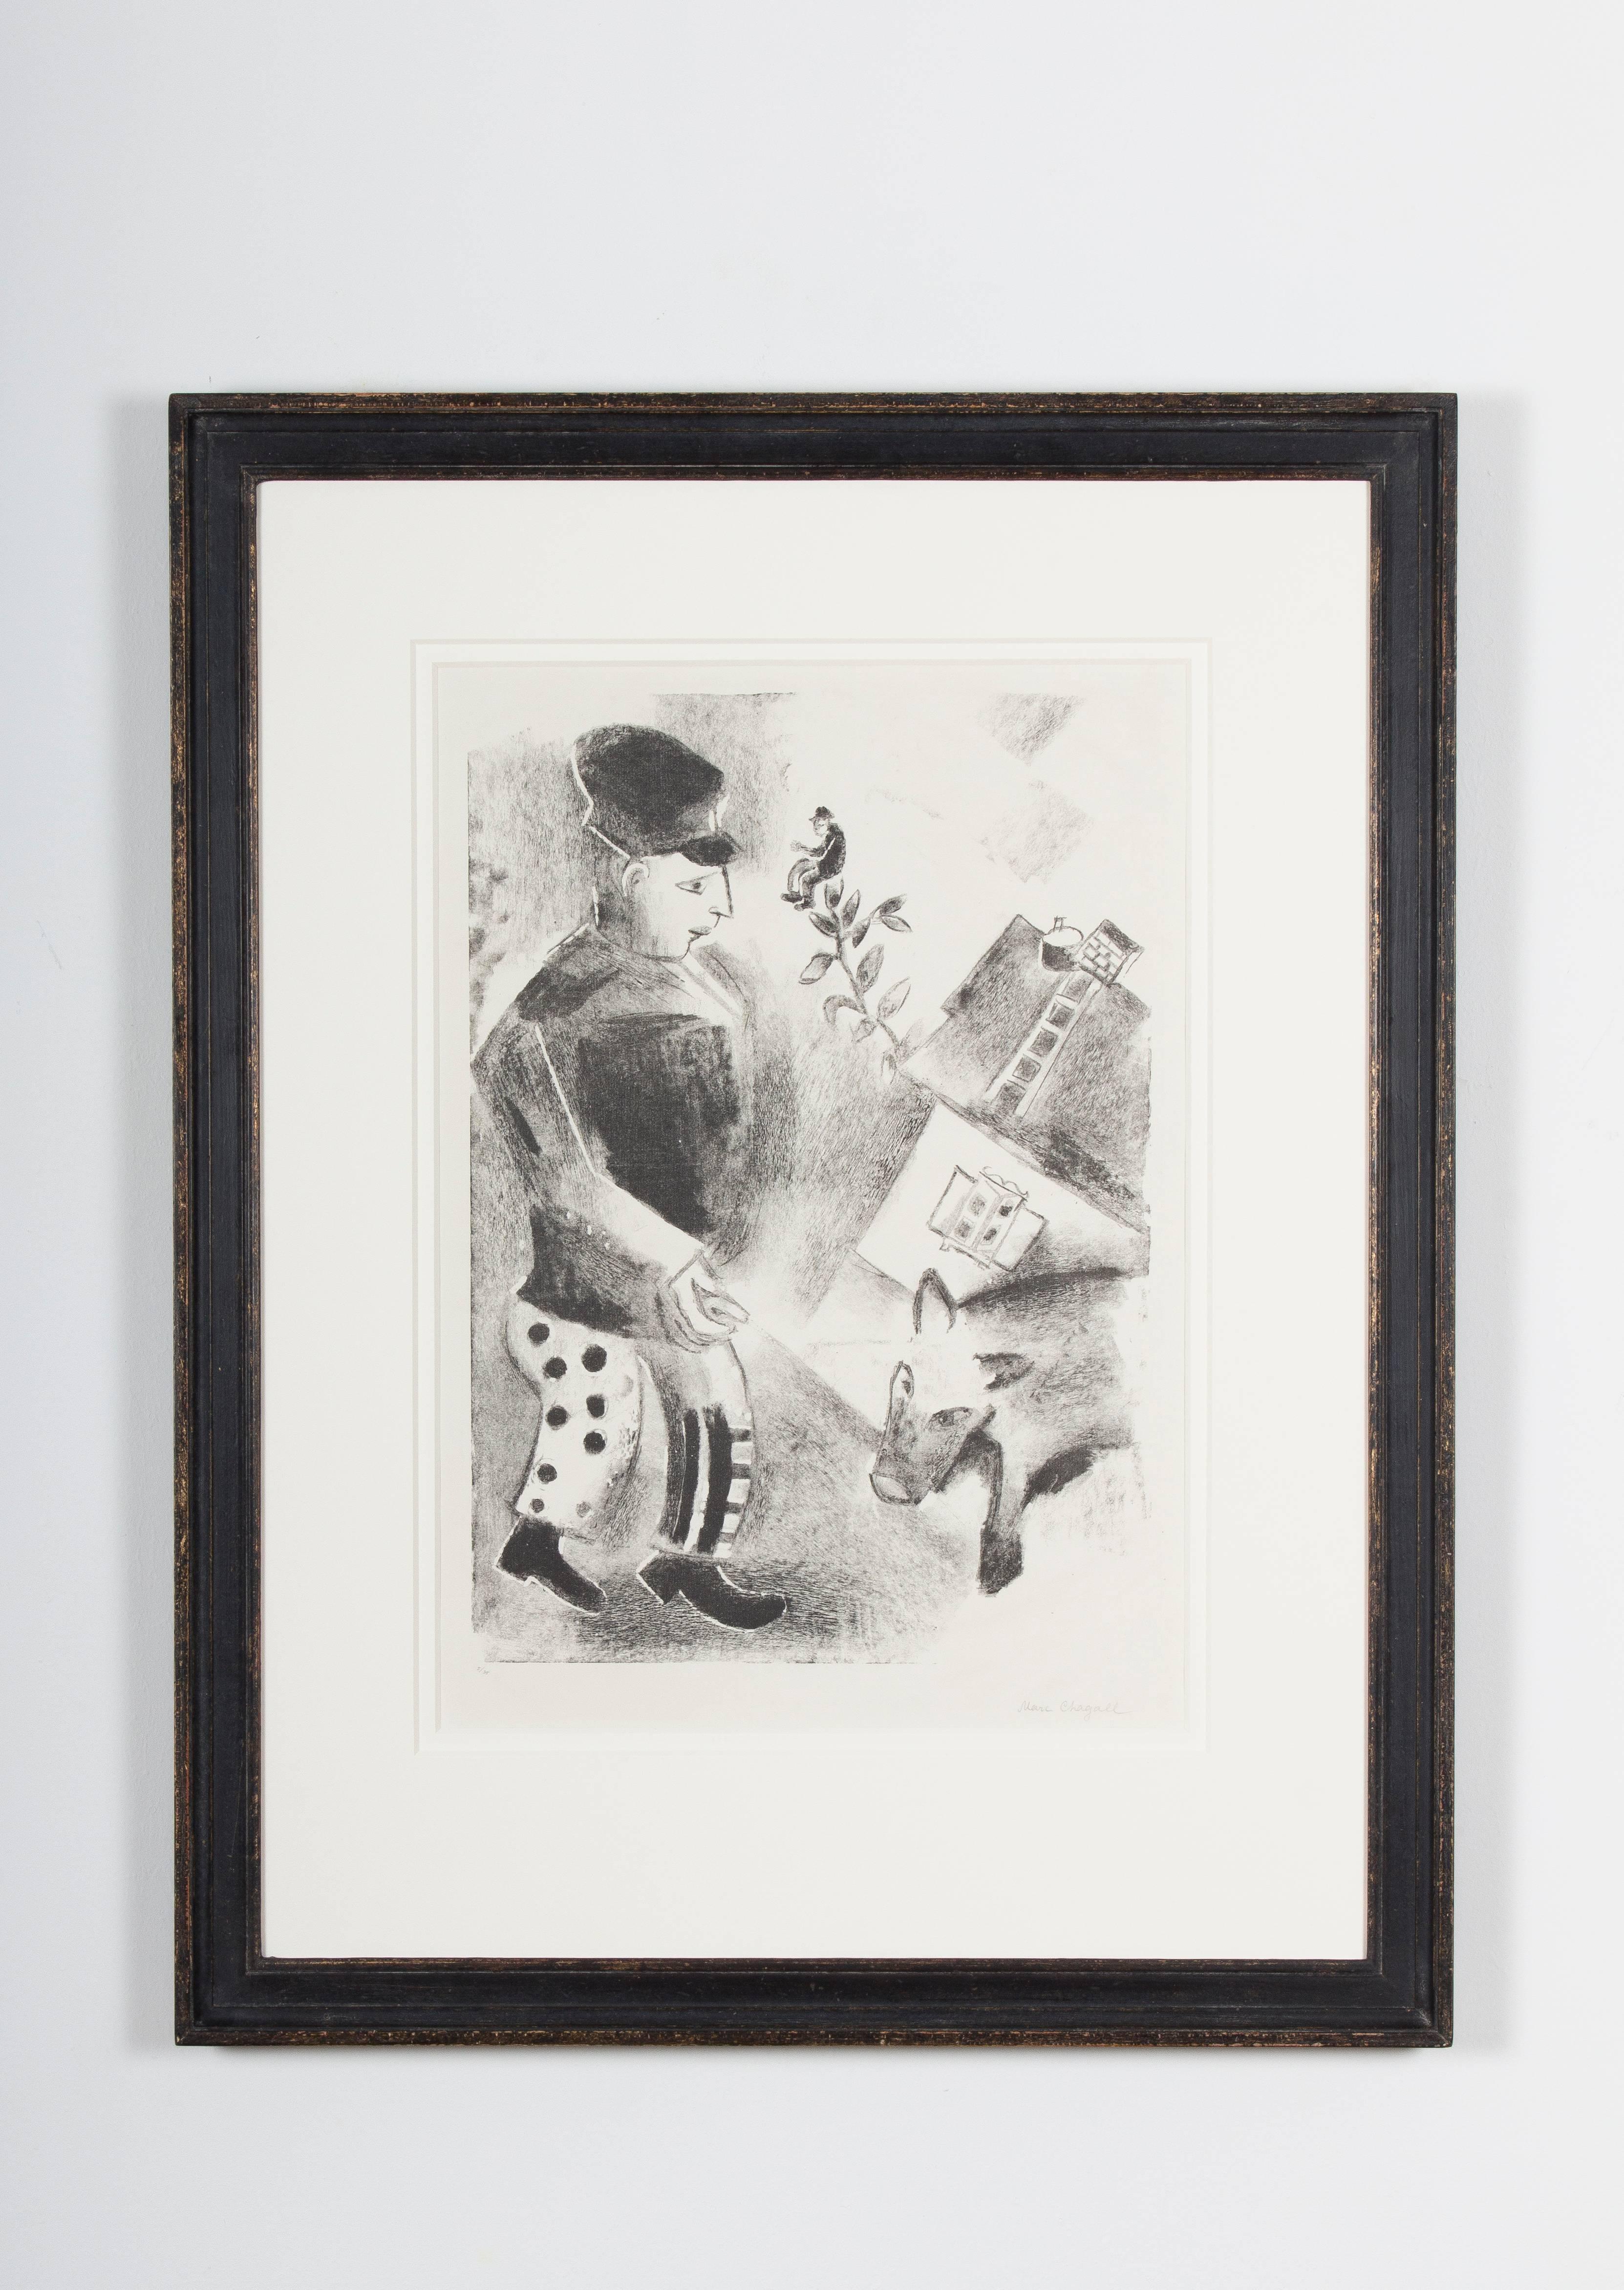 One of the earlier works from the Berlin period, titled with 'L'Homme au cochon'.
Numbered 5/35 and hand signed with pencil 'Marc Chagall'

Technique: lithograph on Vergé paper
Measures: Illustration 46.5 x 32.5 cm / 18.3 x 12.8"
Paper 68 x 51